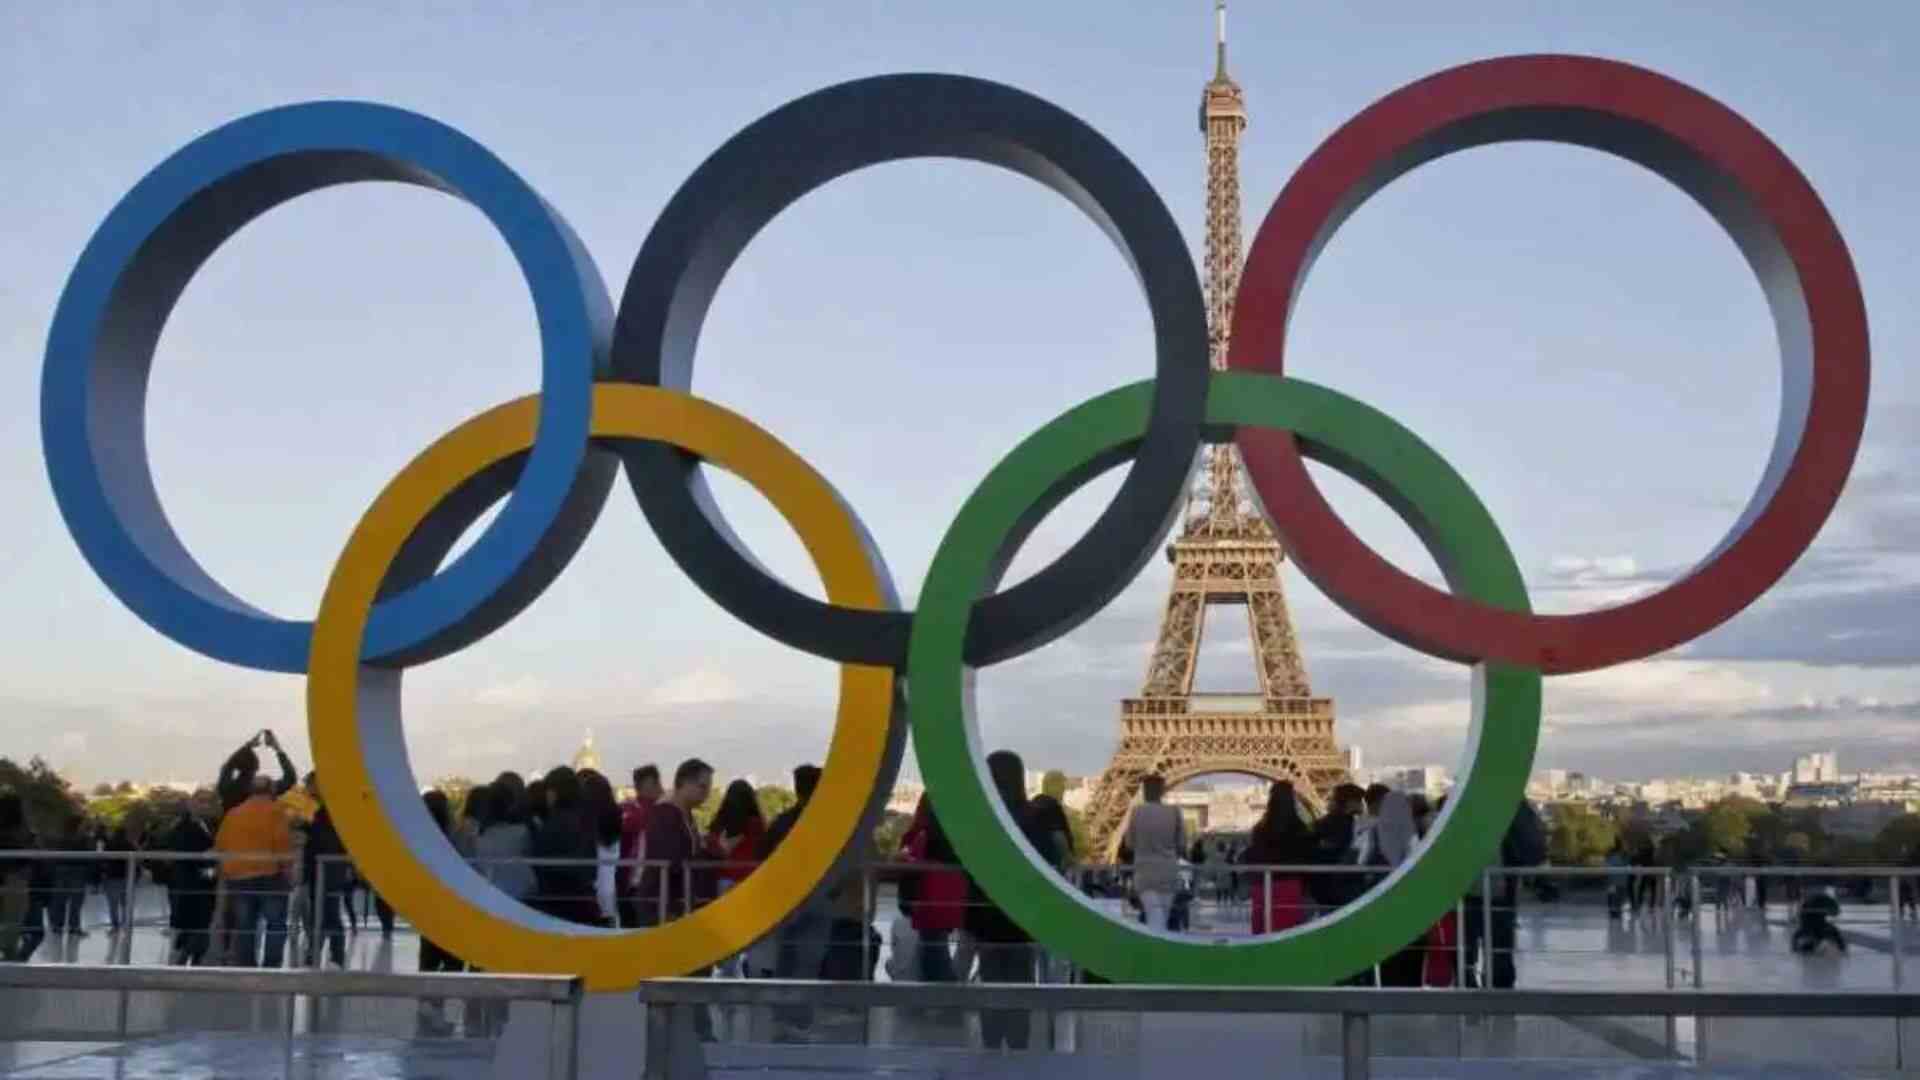 Paris Olympics 2024: Indian Contingent To Be Accompanied With 78 Athletes & Officials From 12 Disciplines In Parade Of Nations